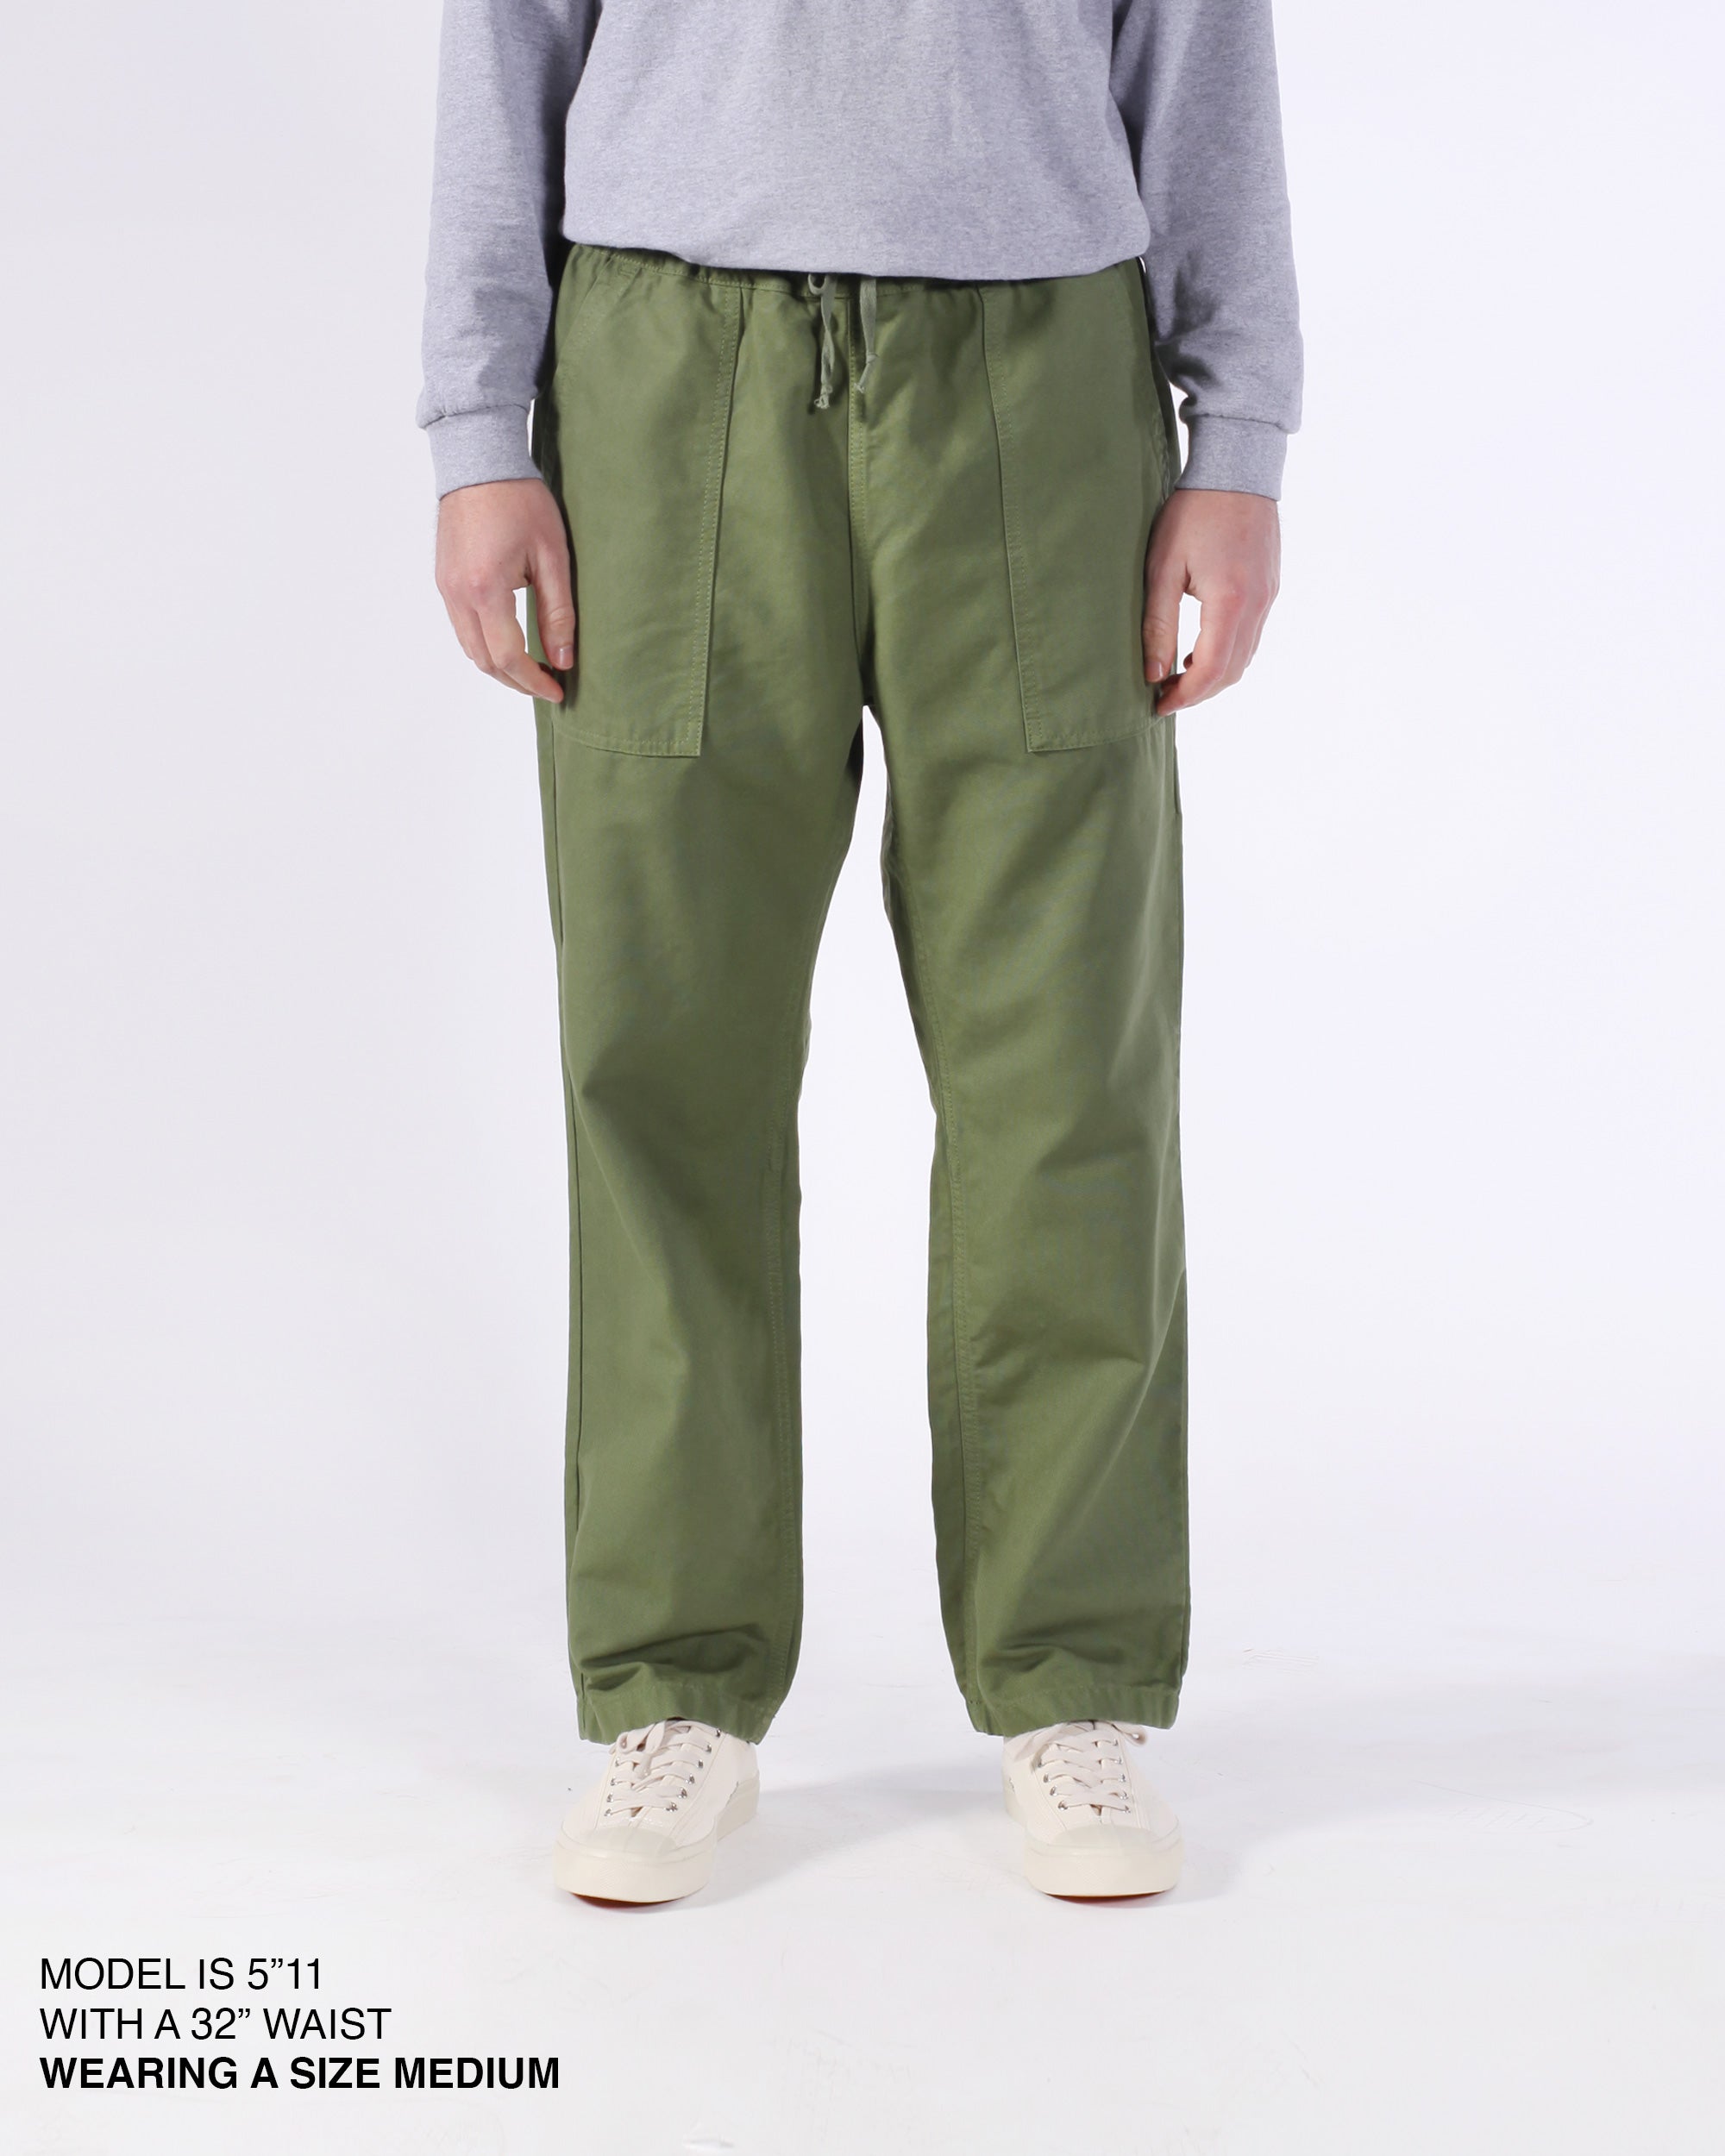 Service Works - Classic Chef Pants - Brown